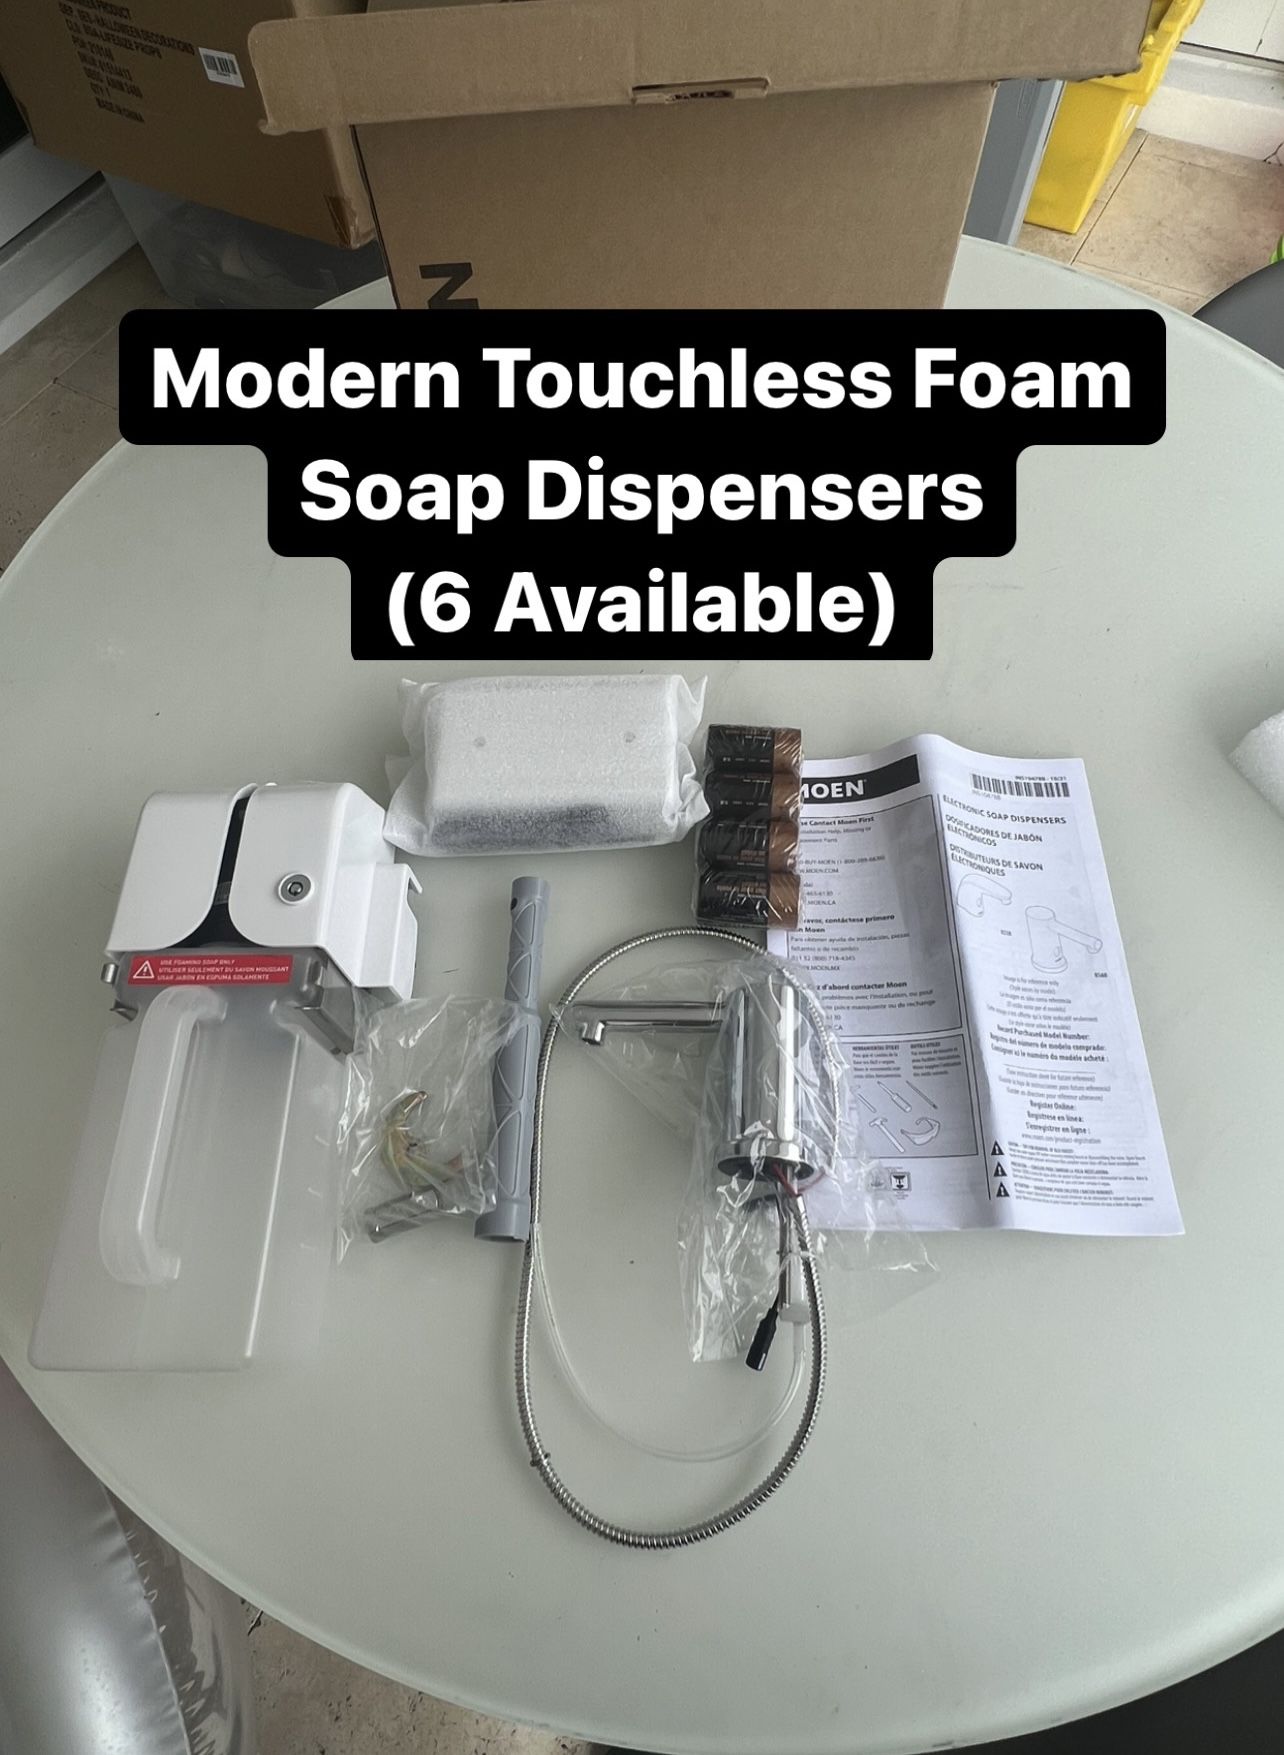 Brand New Modern Restroom Foam Soap Dispensers (6 Available) PickUp Available Today